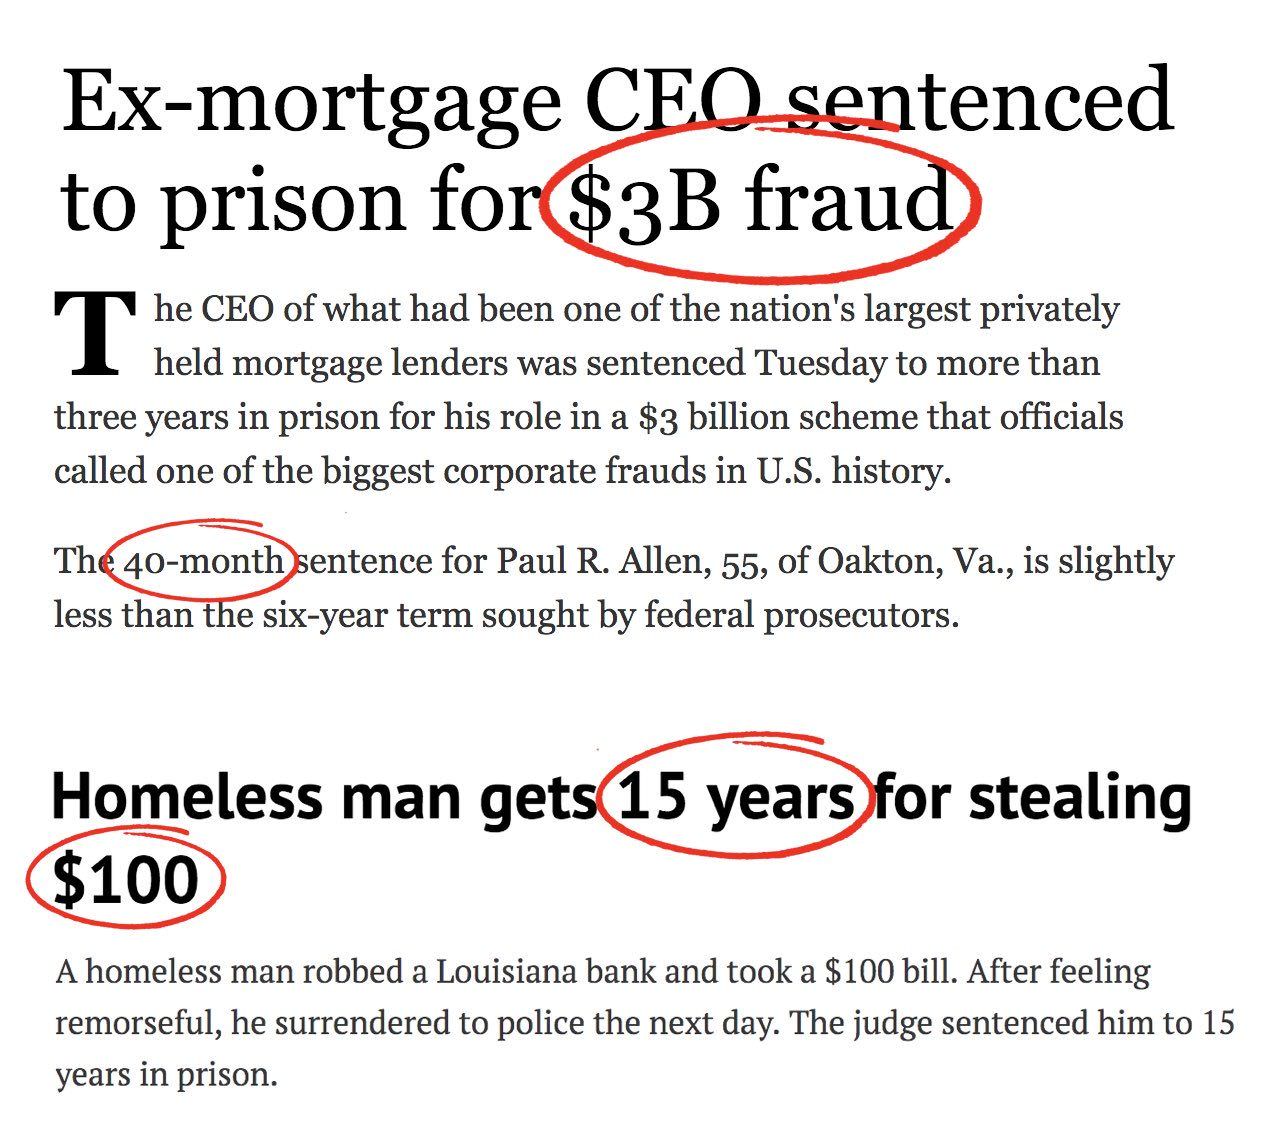 random point - Exmortgage Ceo sentenced to prison for $3B fraud The Ceo of what had been one of the nation's largest privately held mortgage lenders was sentenced Tuesday to more than three years in prison for his role in a $3 billion scheme that official